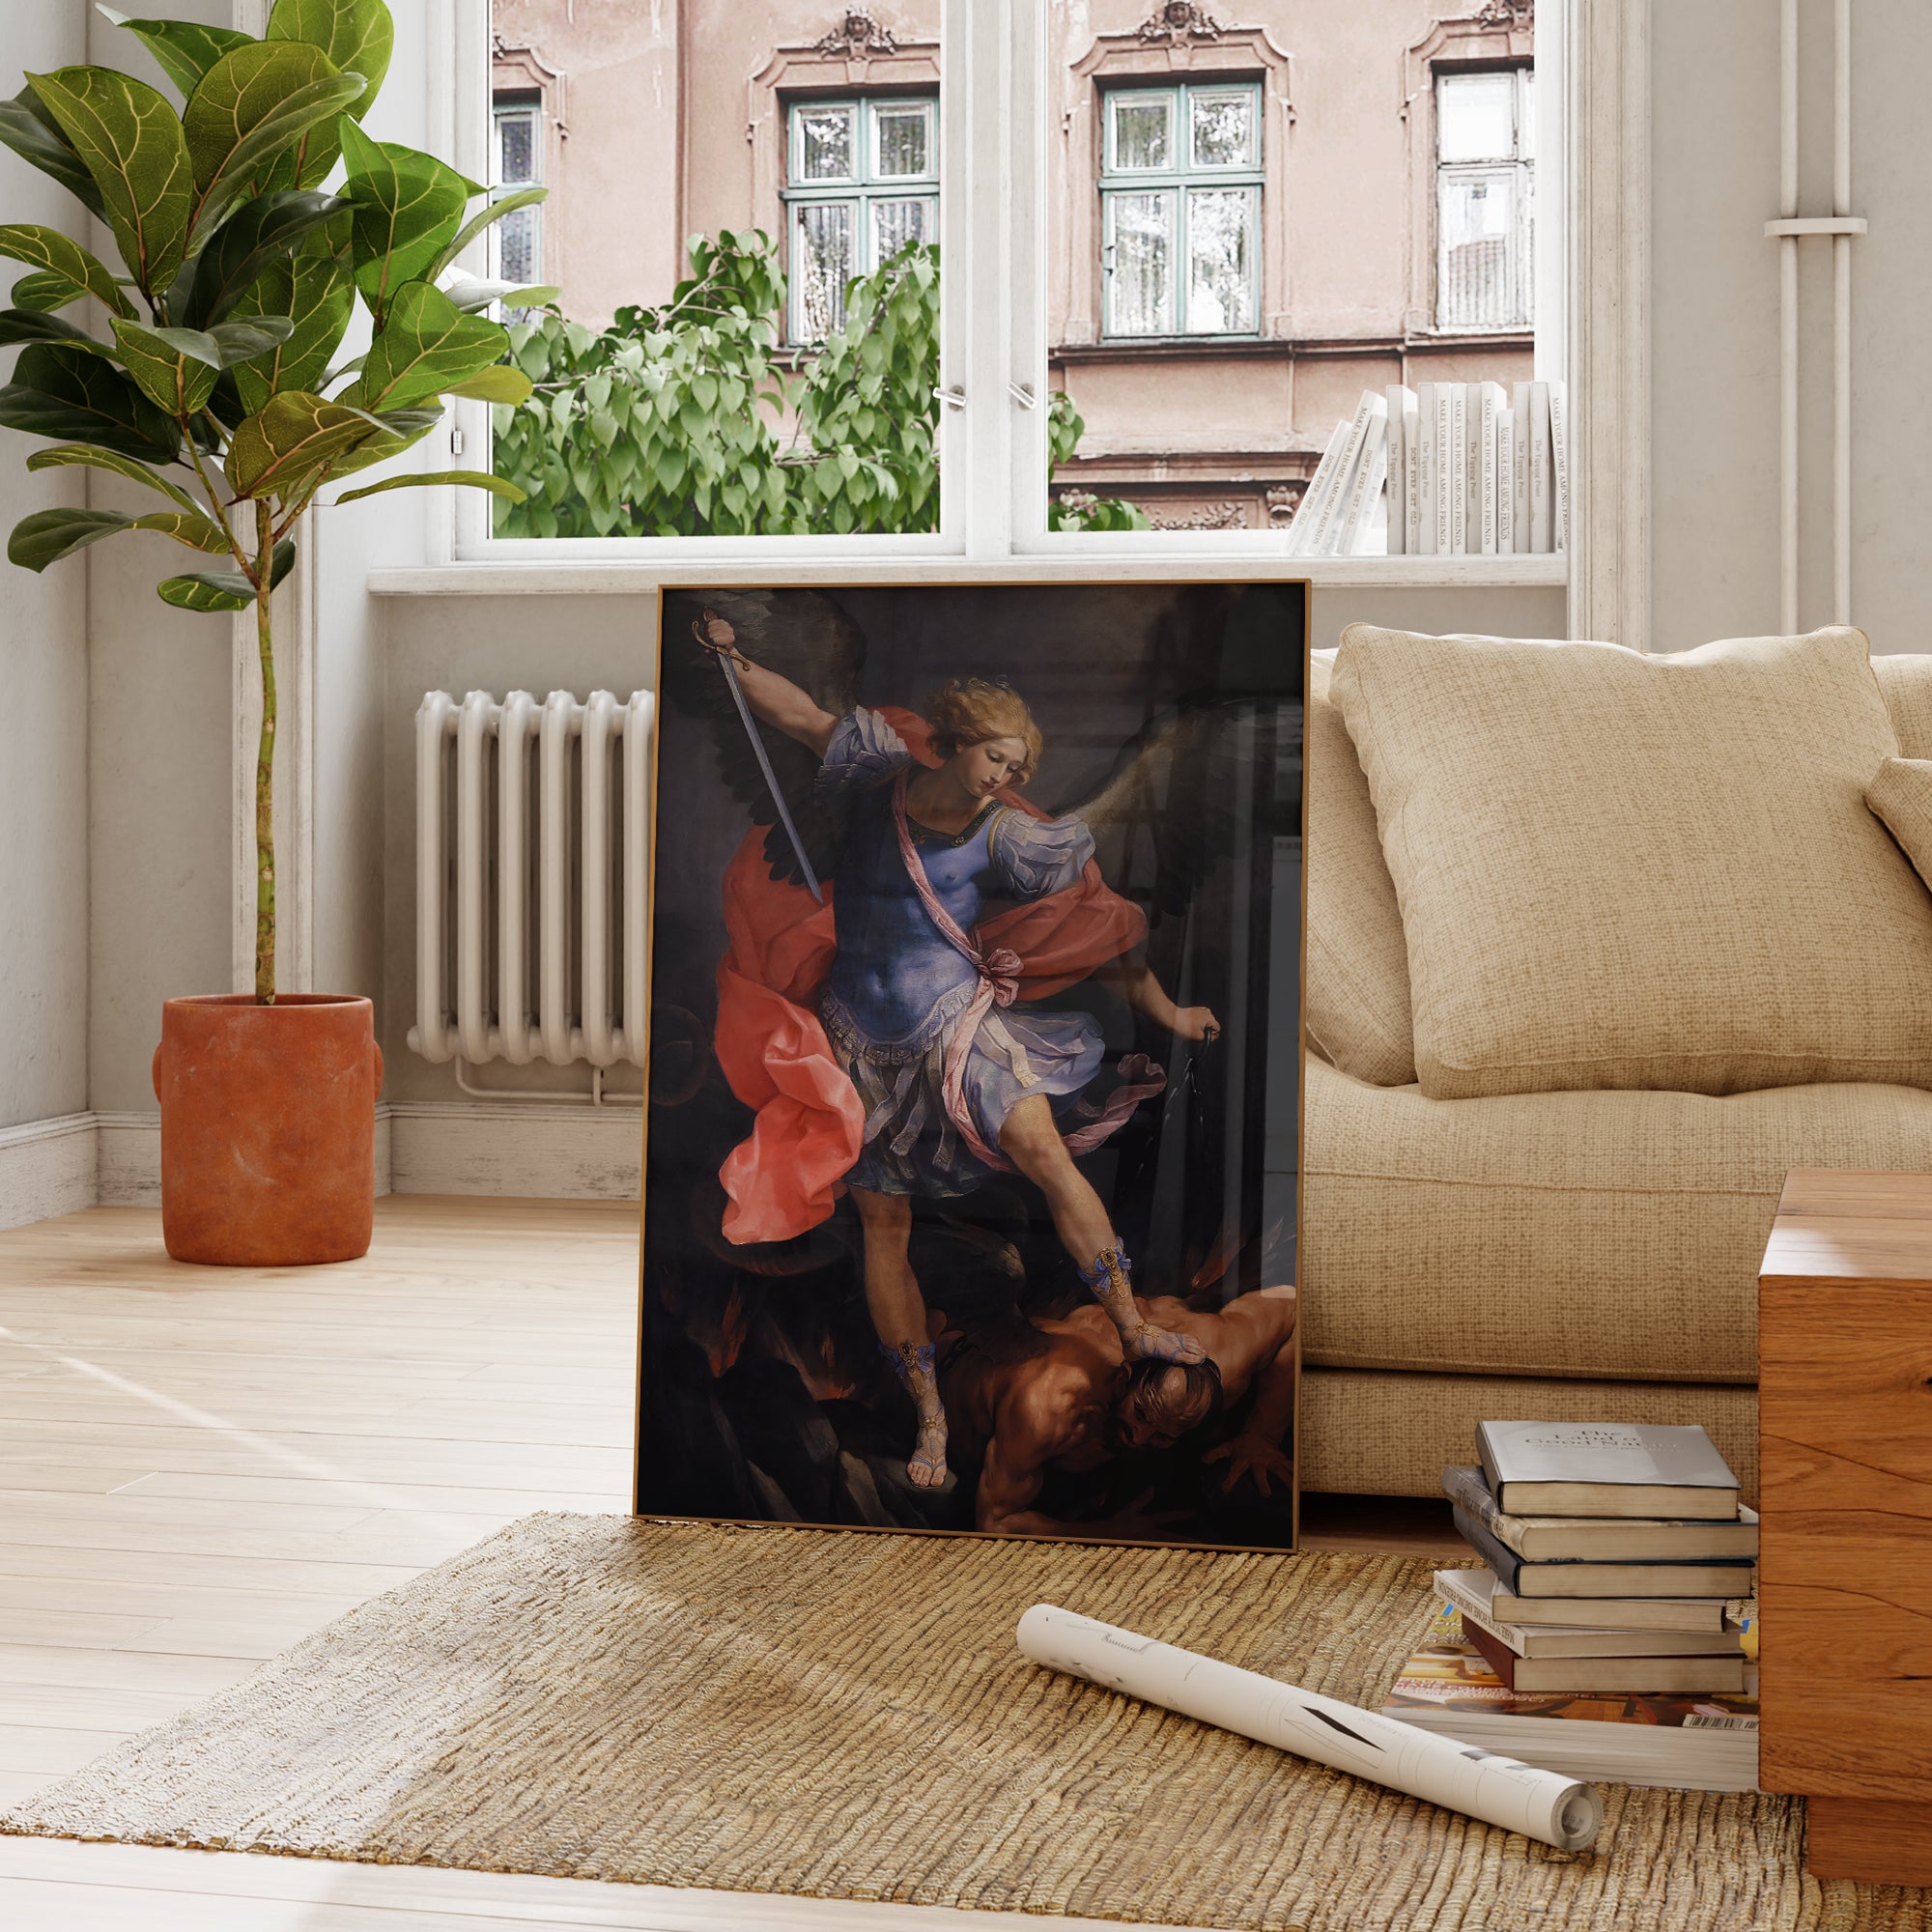 Be inspired by our classic art print Archangel Michael Defeats Satan by Guido Reni. This artwork was printed using the giclée process on archival acid-free paper and is presented in a french living room that captures its timeless beauty in every detail.